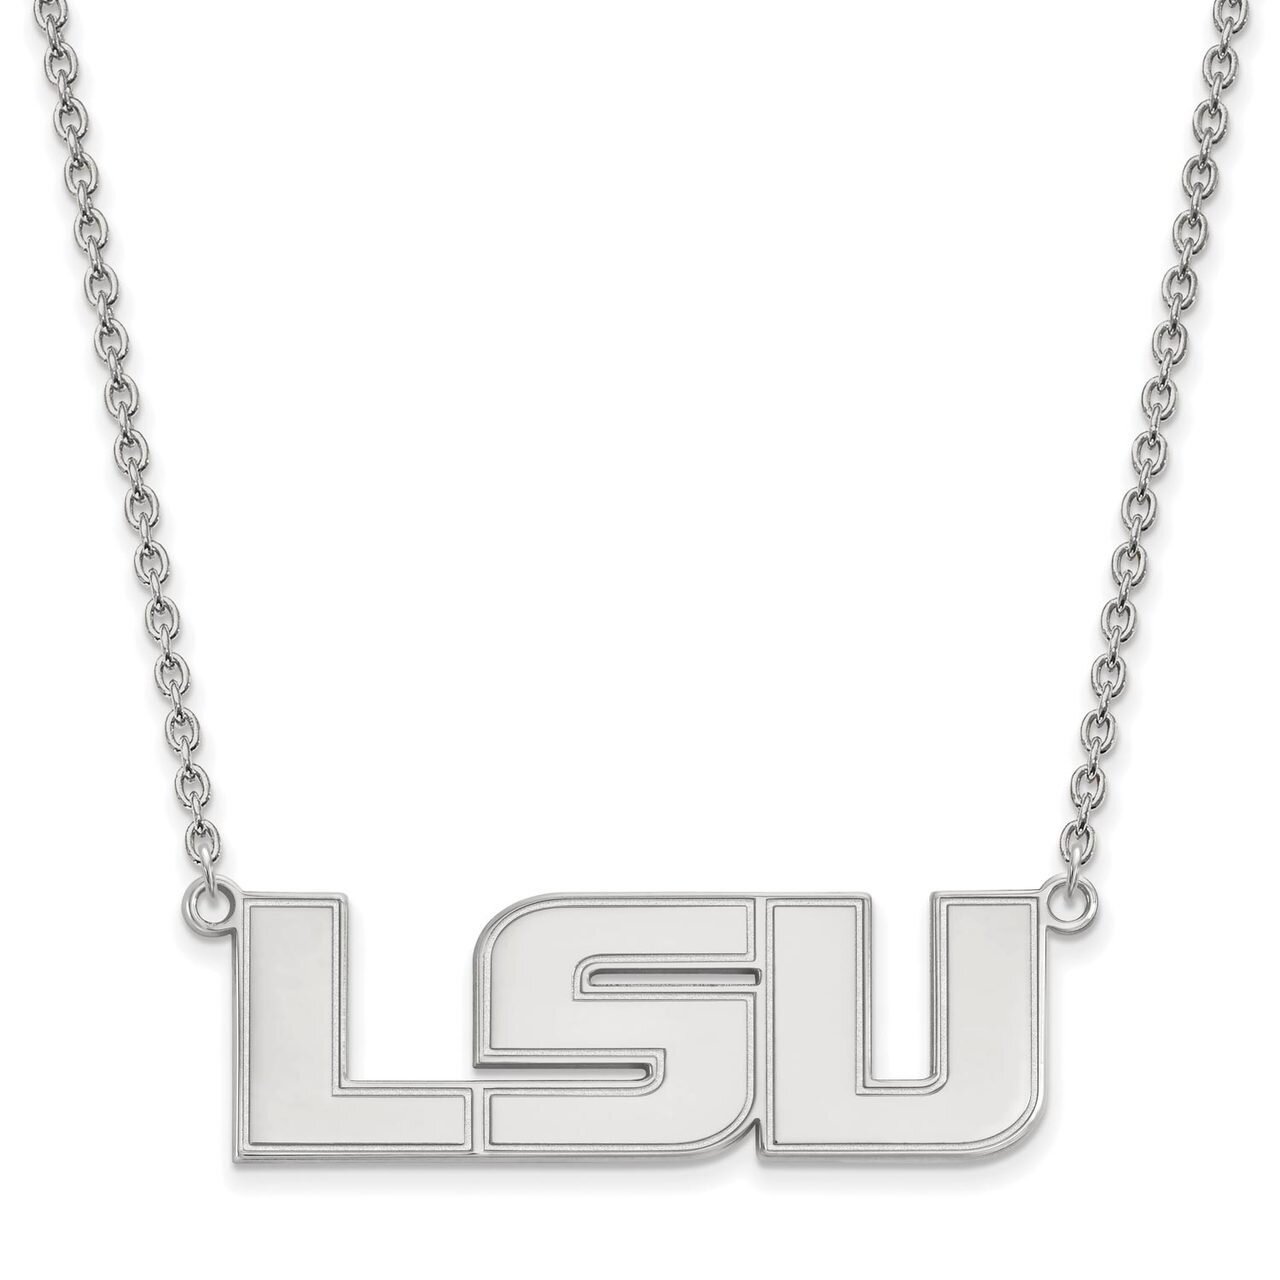 Louisiana State University Large Pendant with Chain Necklace 10k White Gold 1W010LSU-18